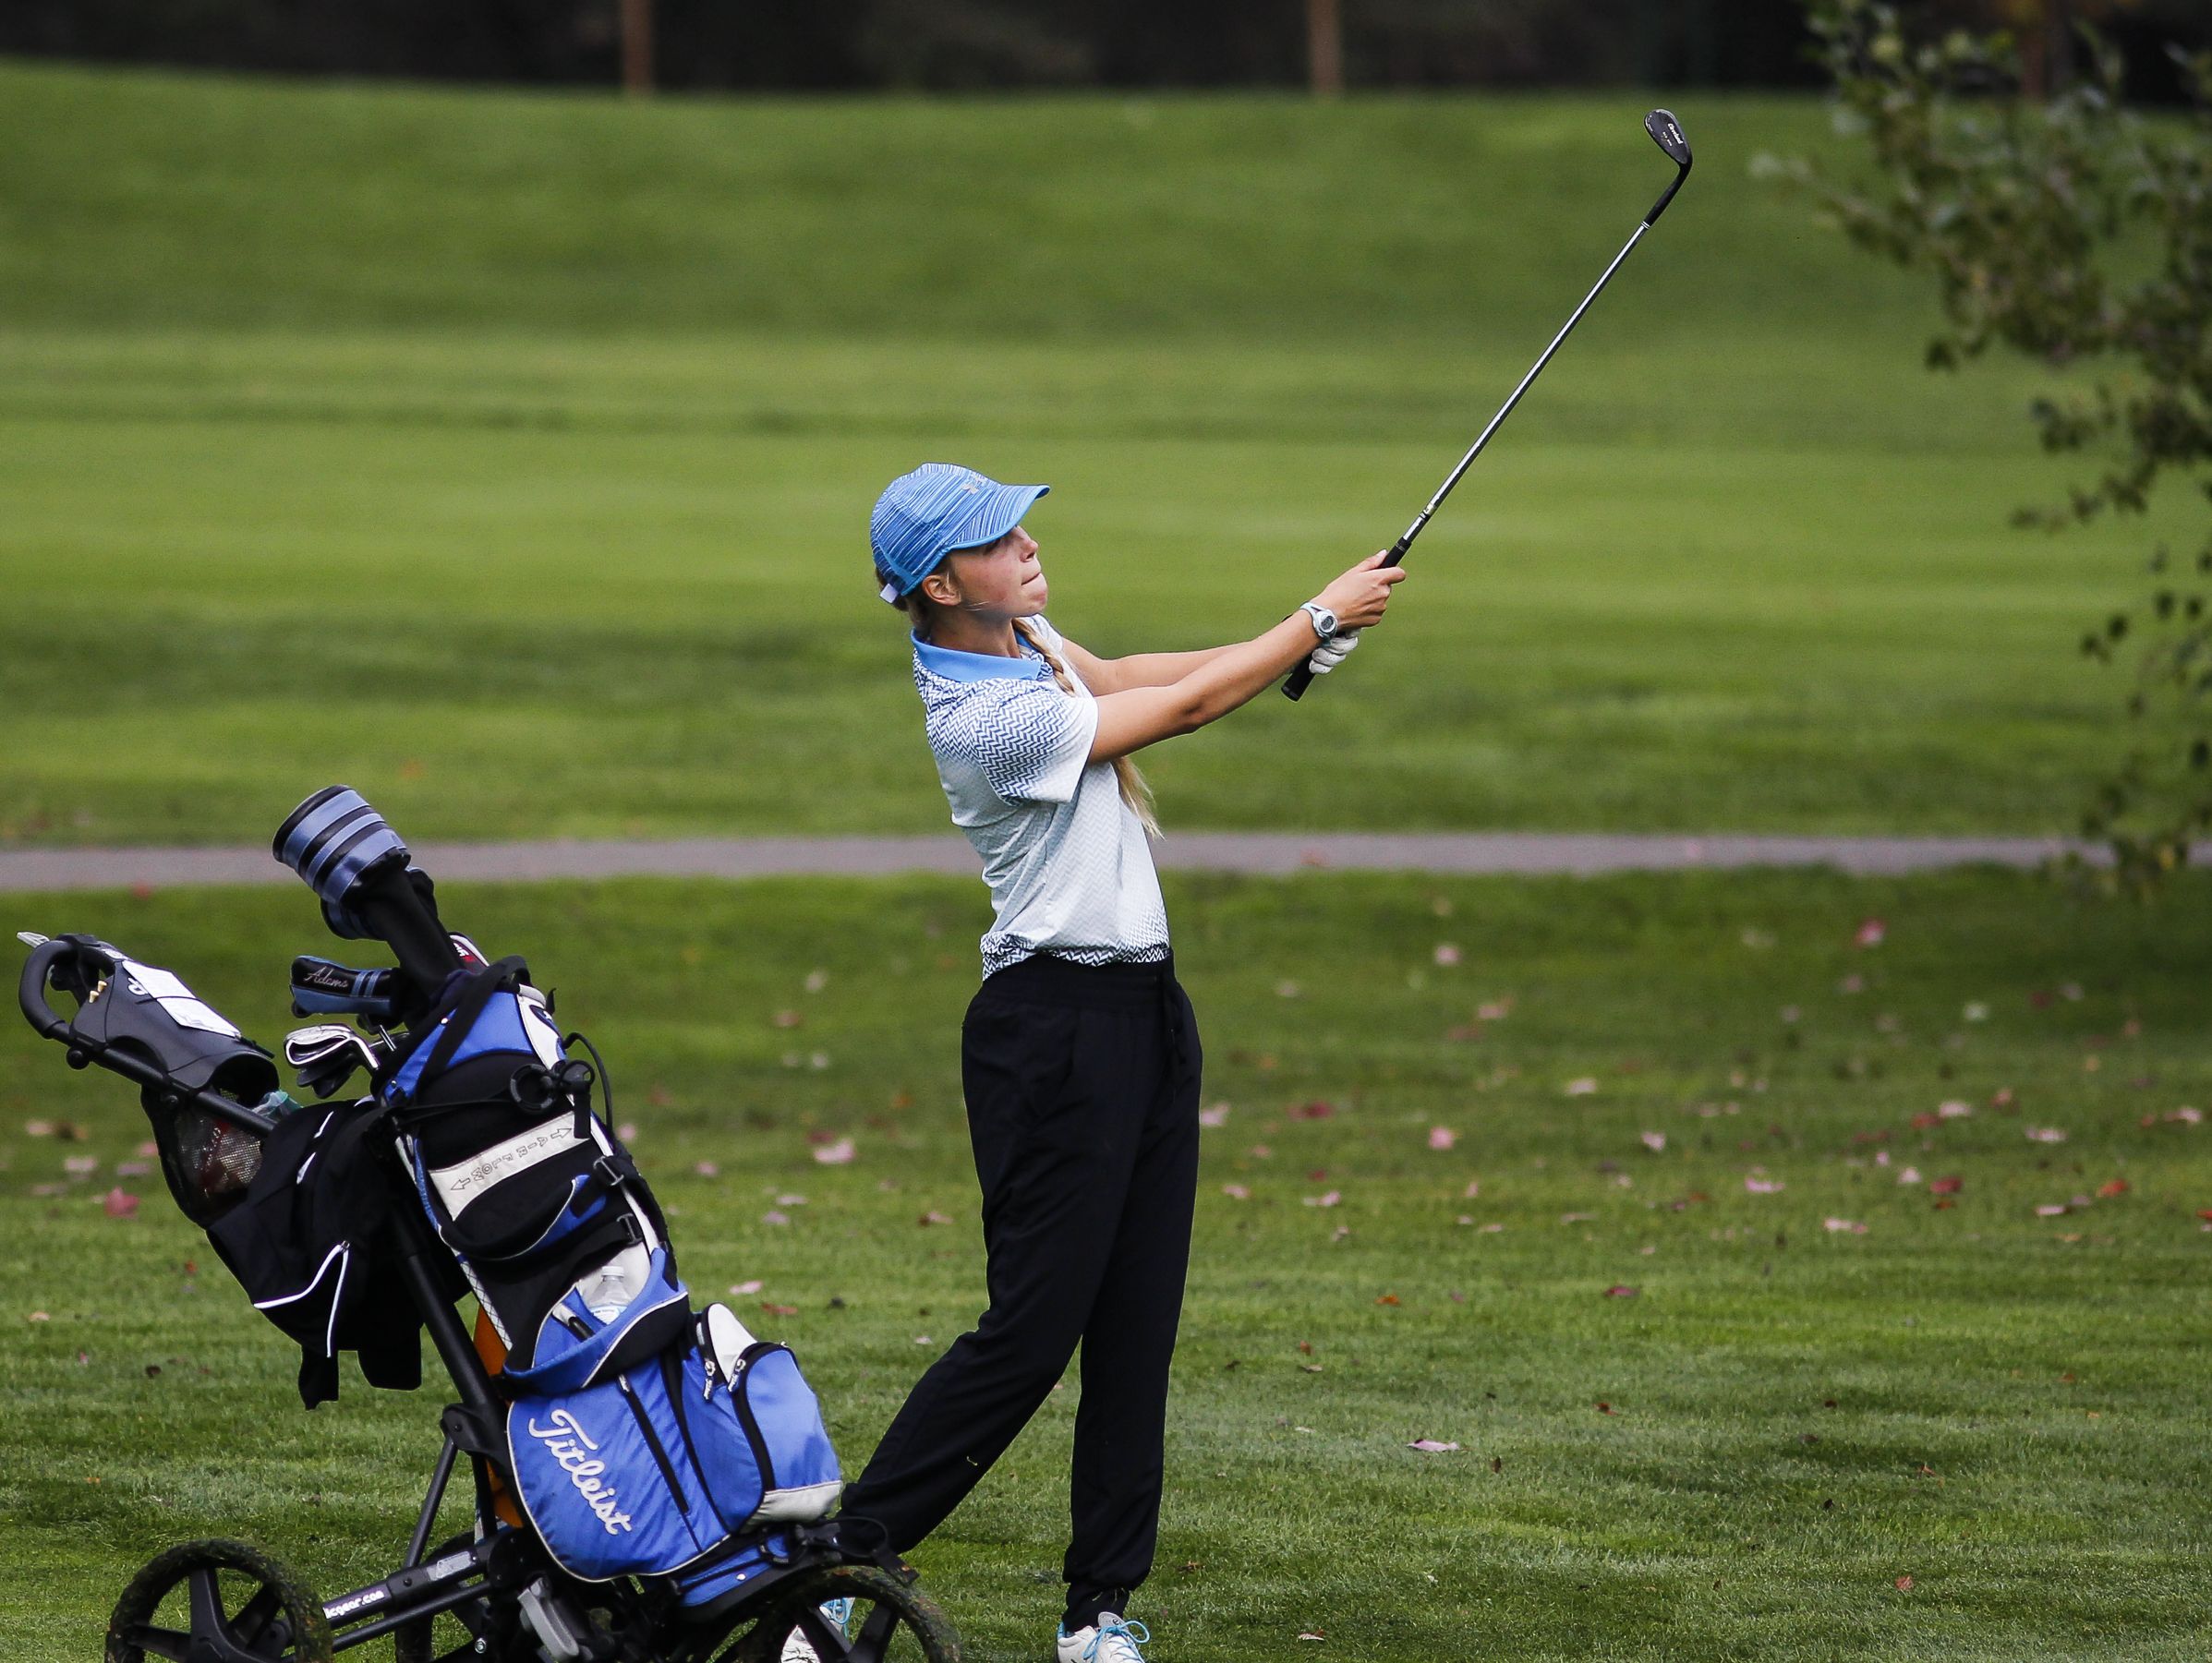 Grace Castle of Lansing Catholic works the fairway on the second hole during the Div. 4 Girls Golf Finals October 15, 2016, at Forest Akers West at Michigan State University.